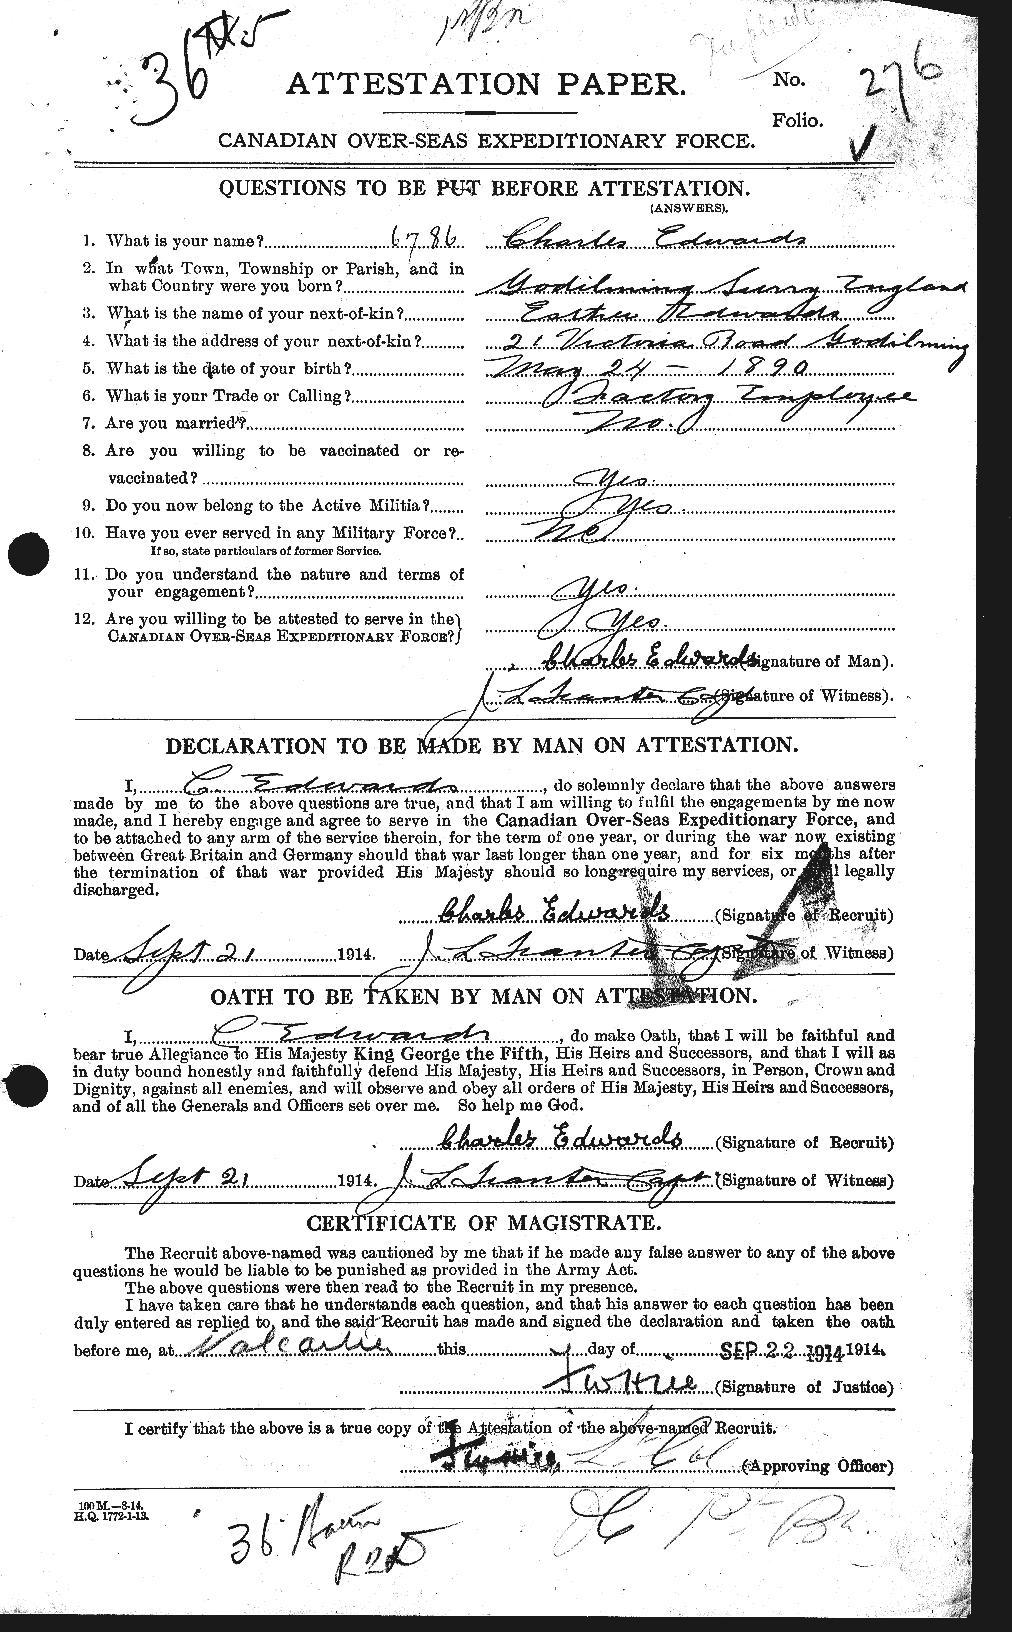 Personnel Records of the First World War - CEF 307826a